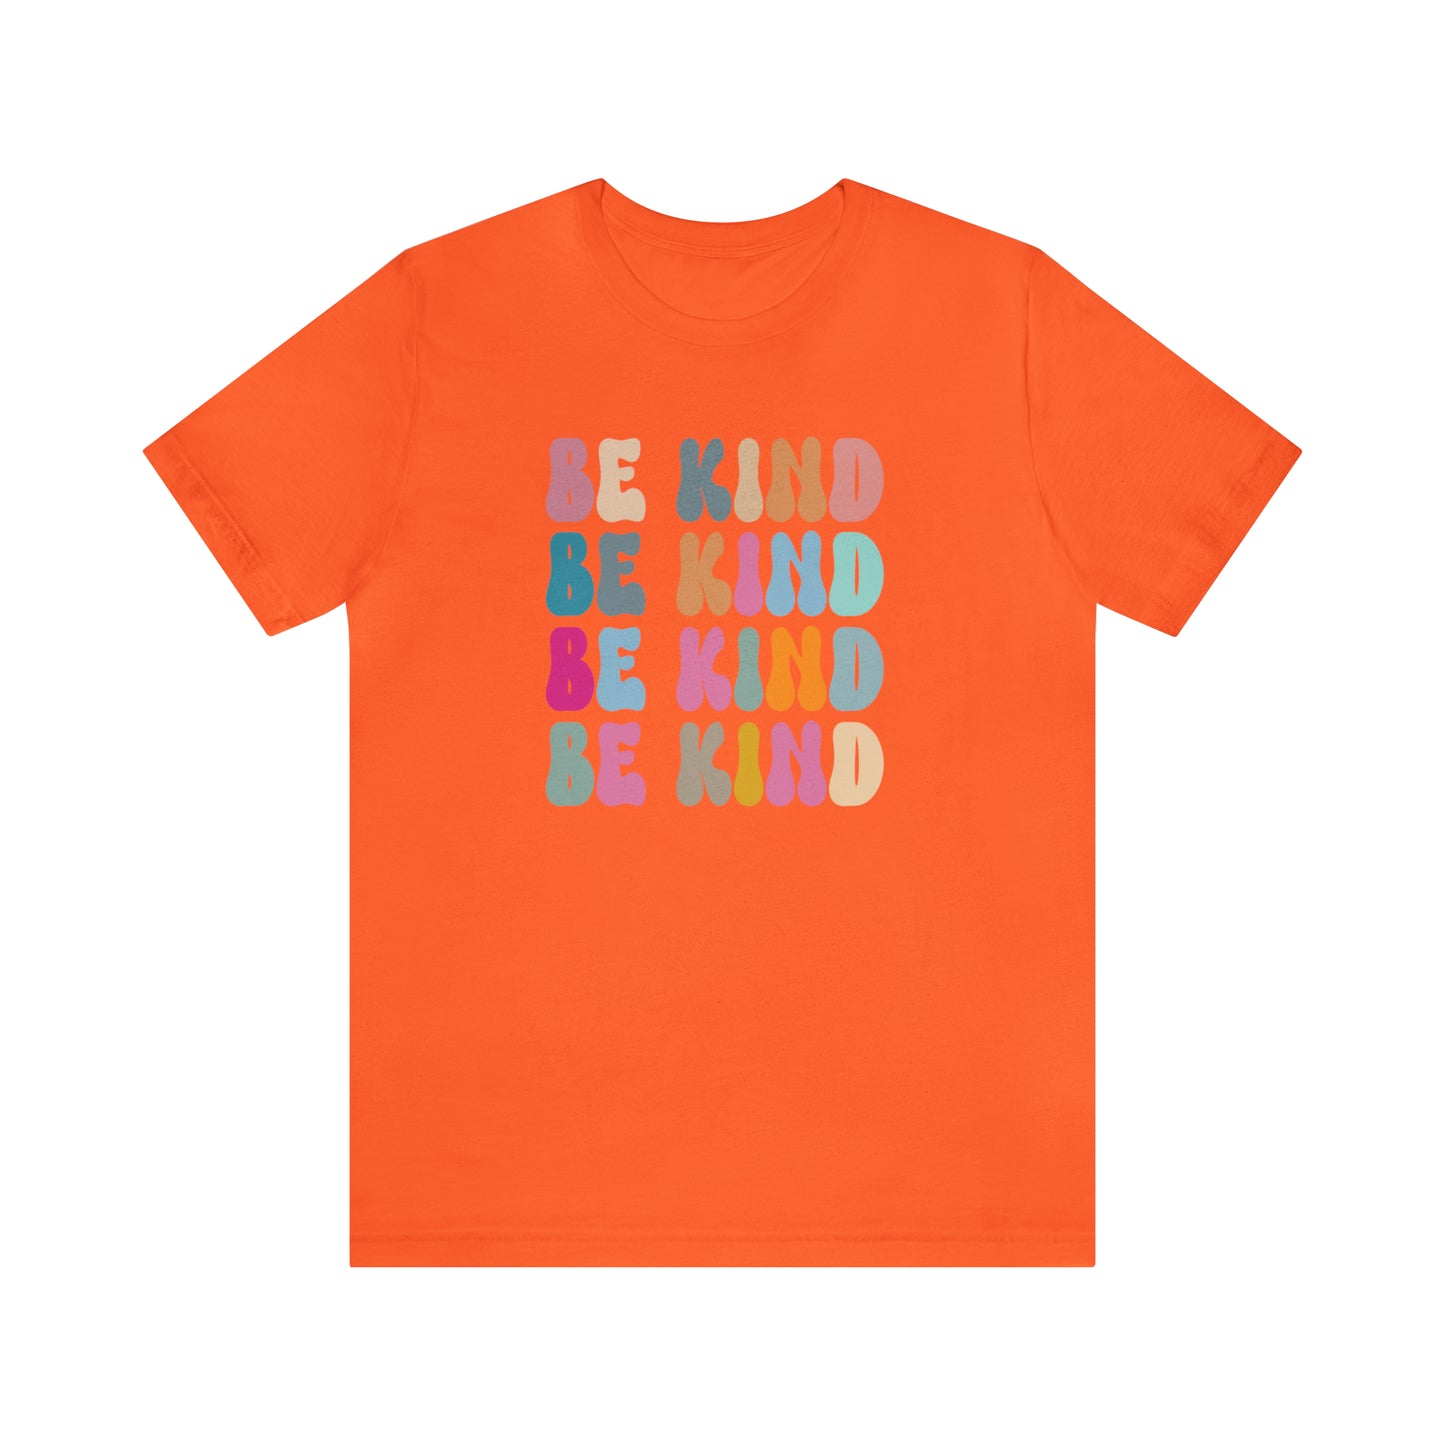 Be Kind TShirt for Her, Retro Be Kind Shirt for Women, Cute Be Kind T-Shirt for Birthday Gift, T445